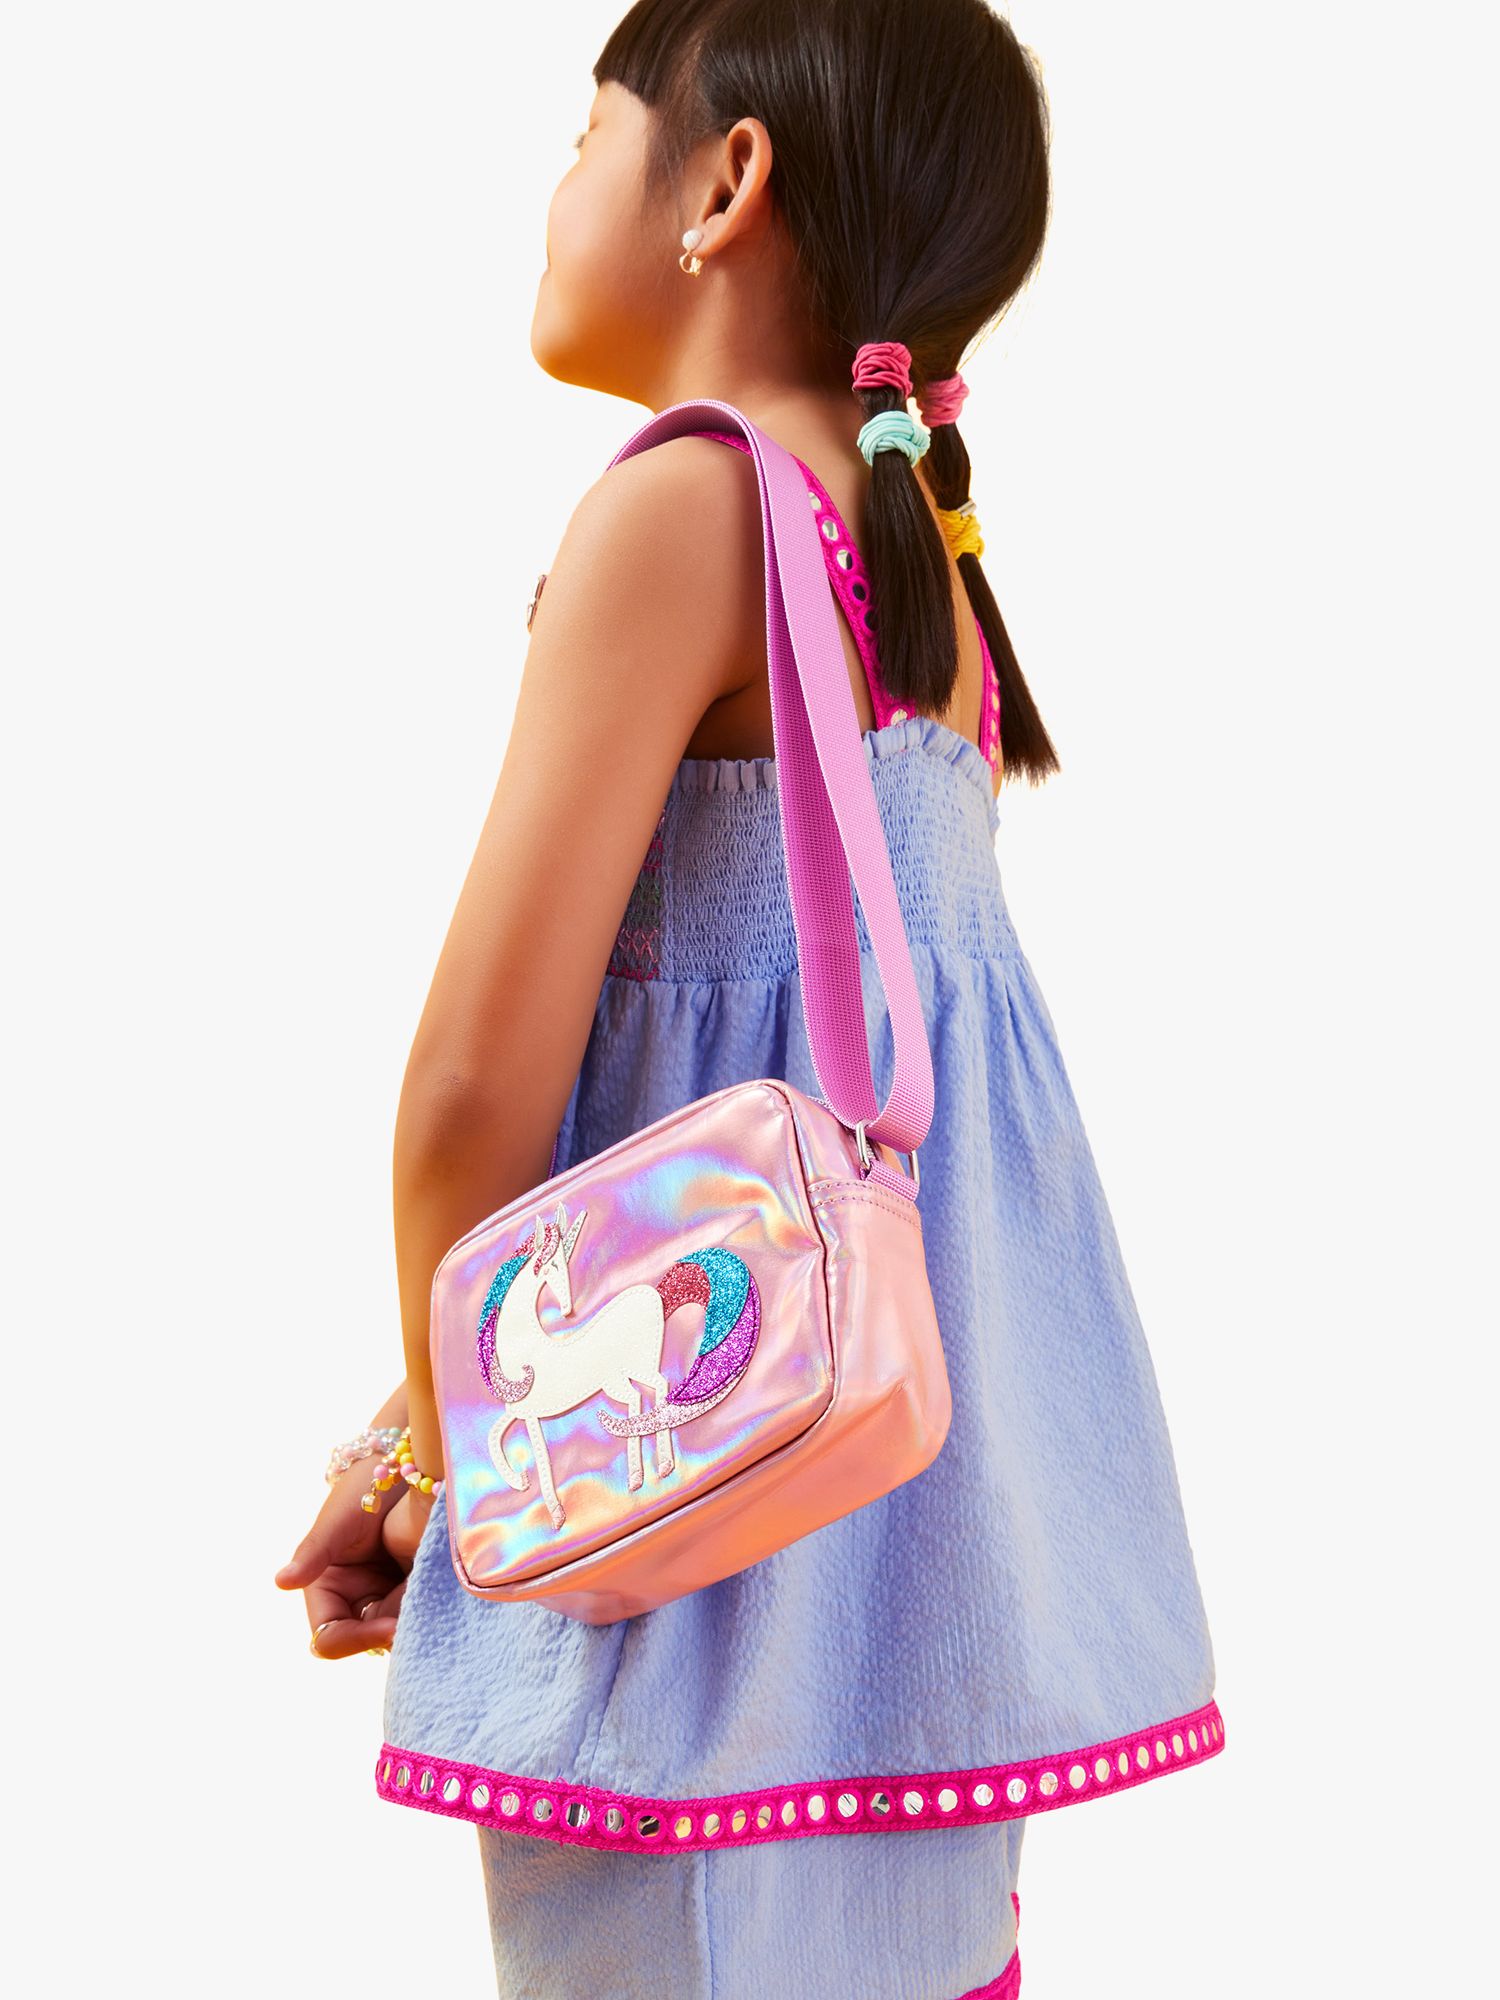 Buy Angels by Accessorize Kids' Sparkly Unicorn Camera Bag, Pink/Multi Online at johnlewis.com